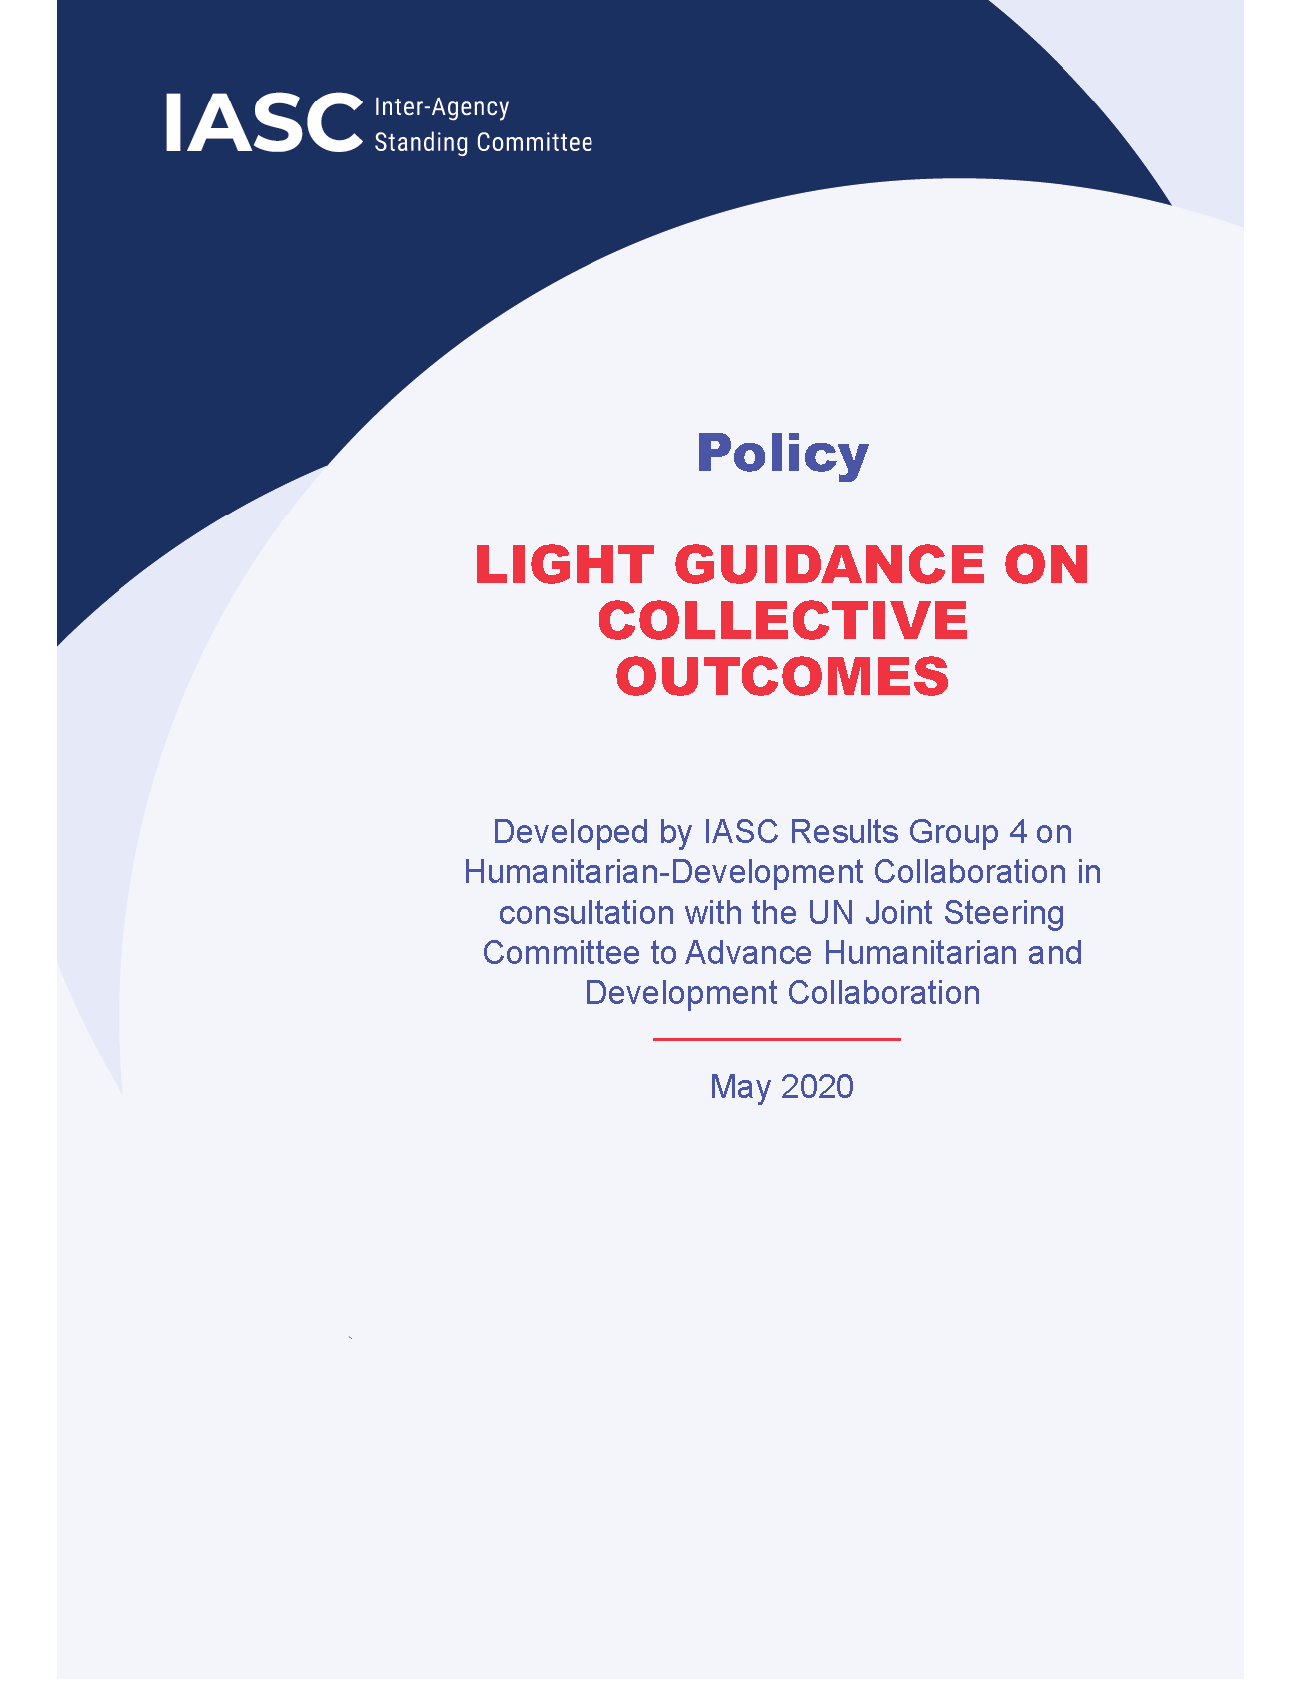 Cover page for Light Guidance on Collective Outcomes: Planning and Implementing the HDP Nexus in Contexts of Protracted Crisis